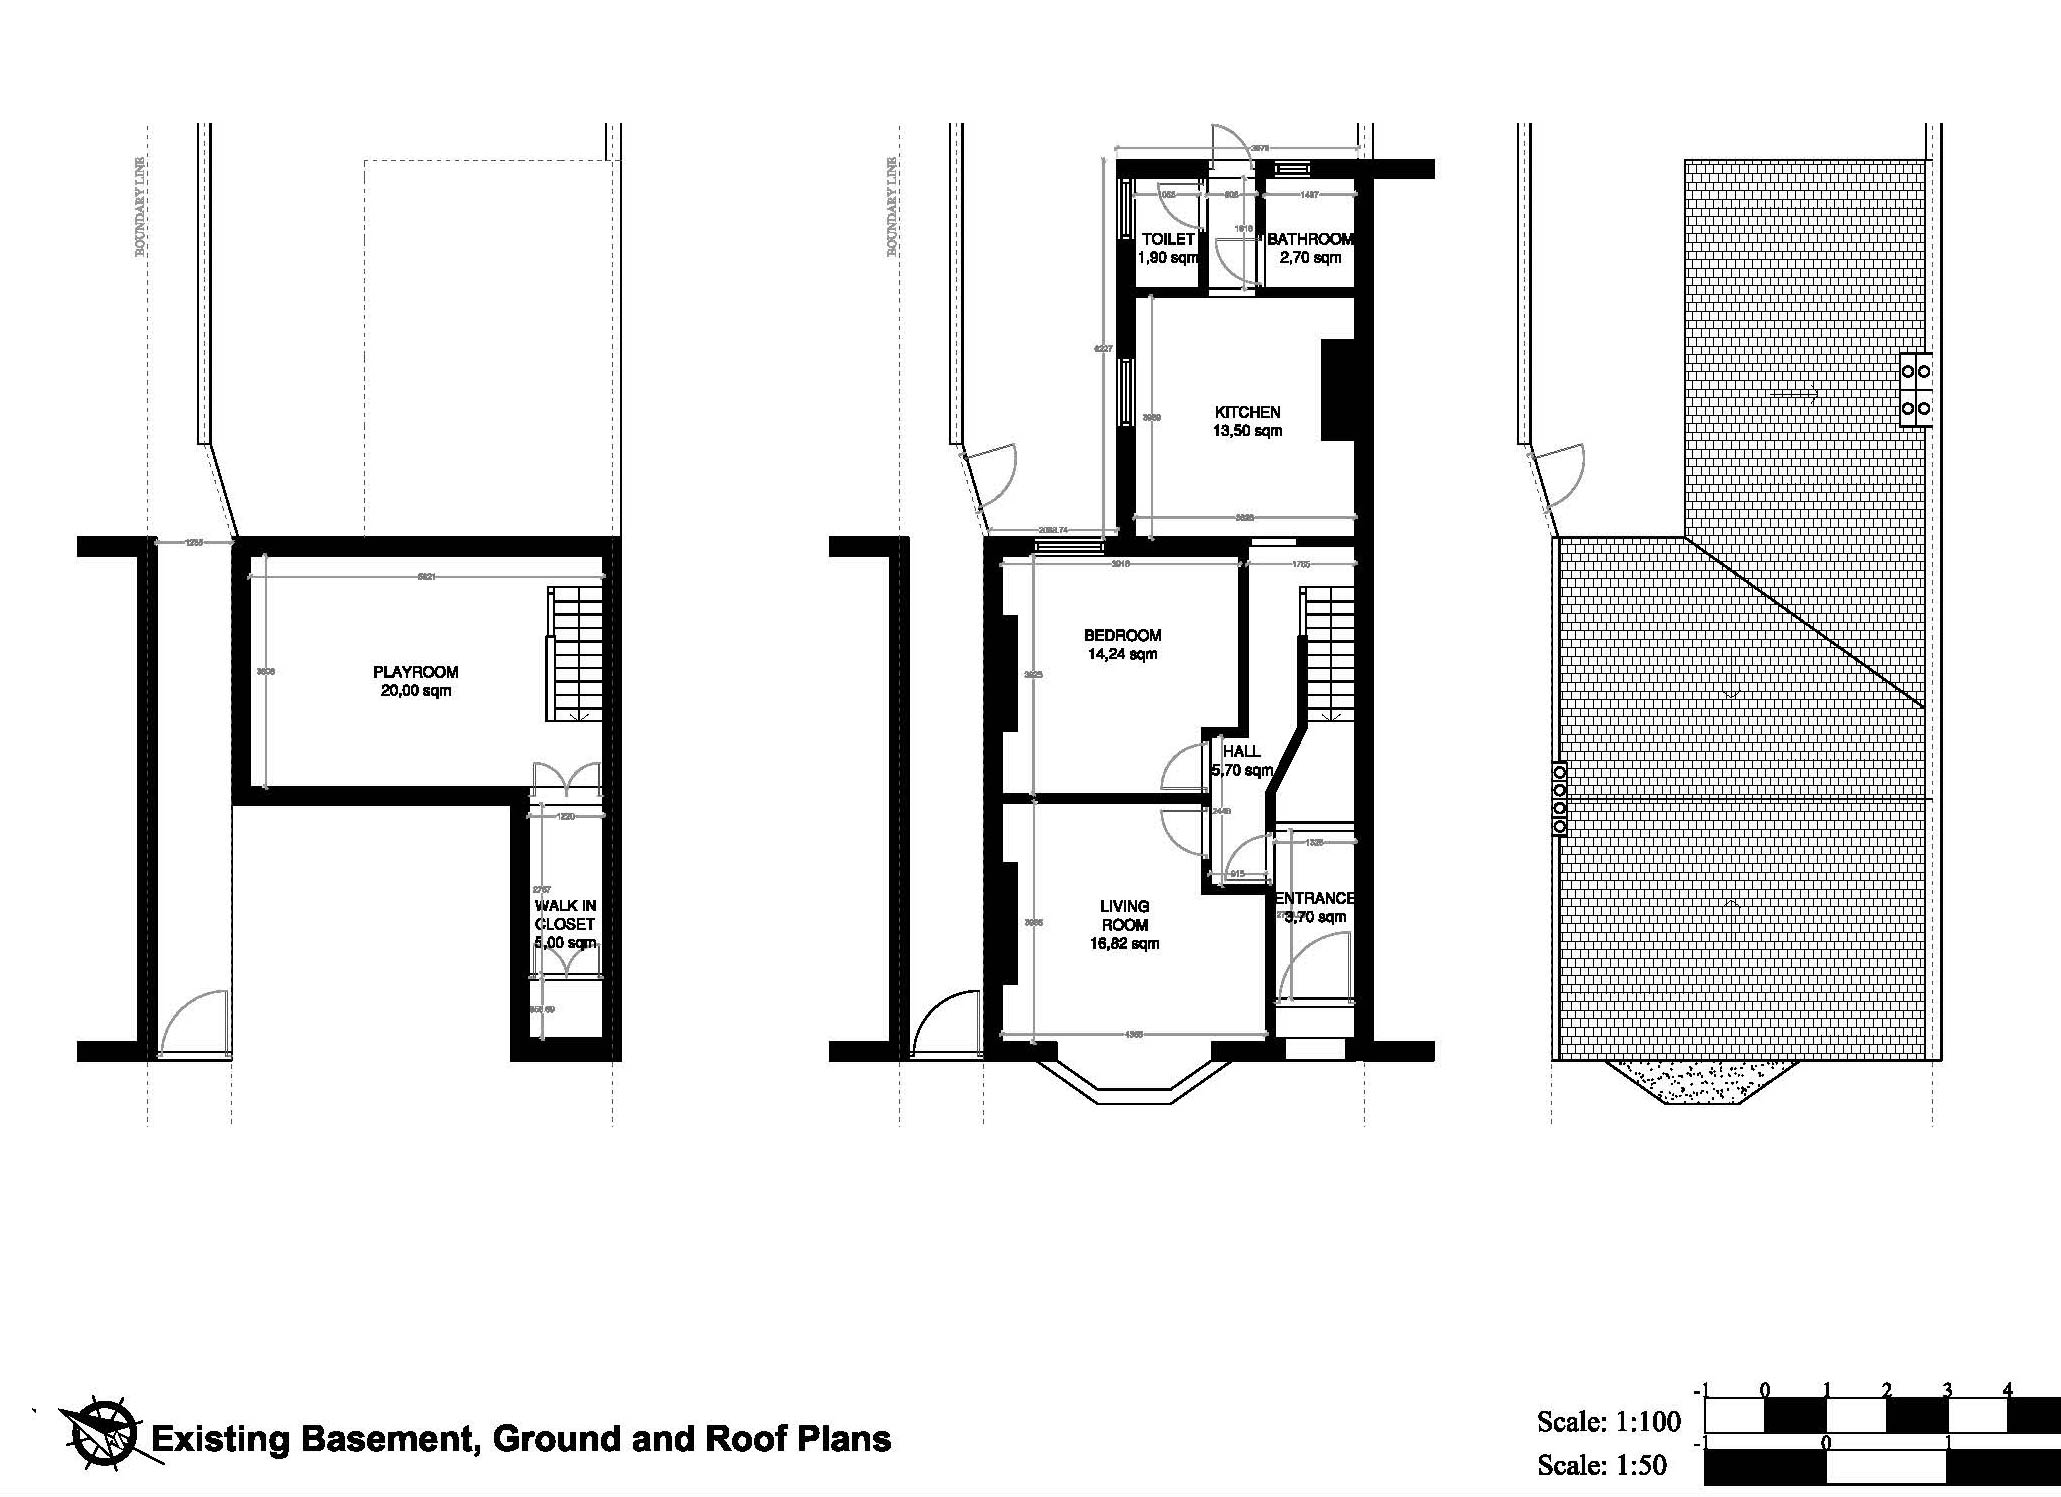 Wandsworth-council-existing-basement-ground-floor,-roof-proposal-2